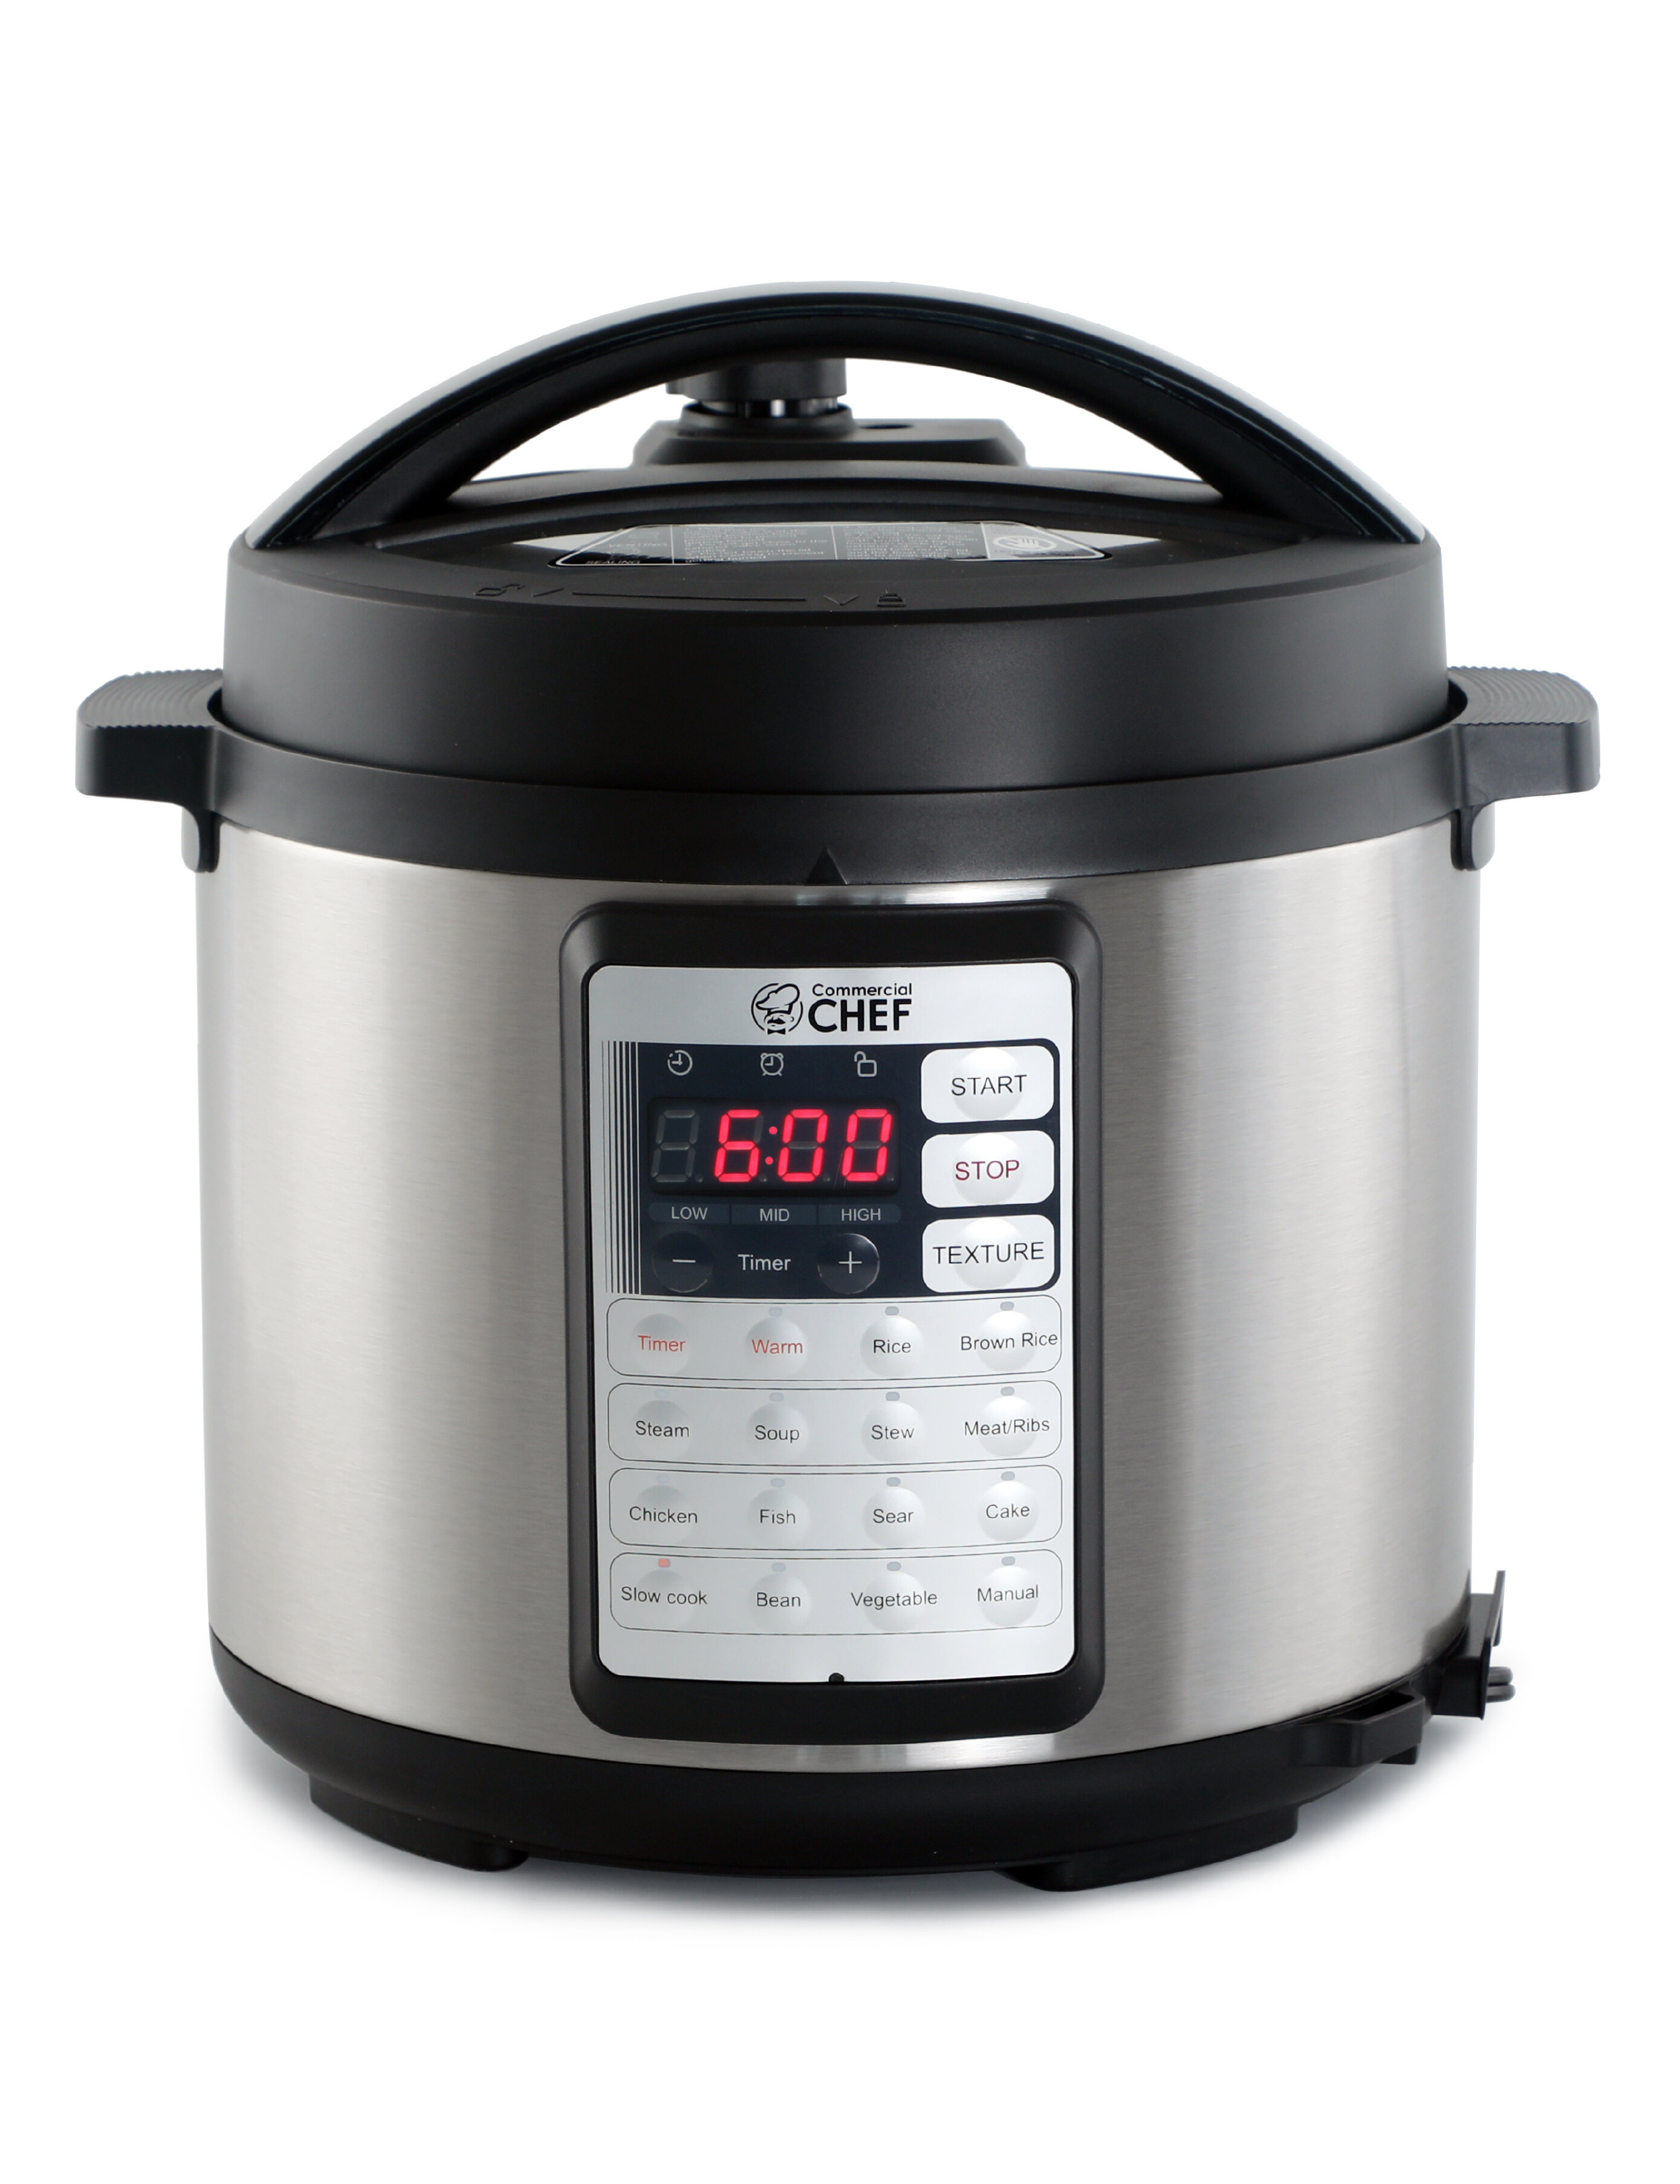 How to Use an Electric Pressure Canner (Digital Pressure Canner)